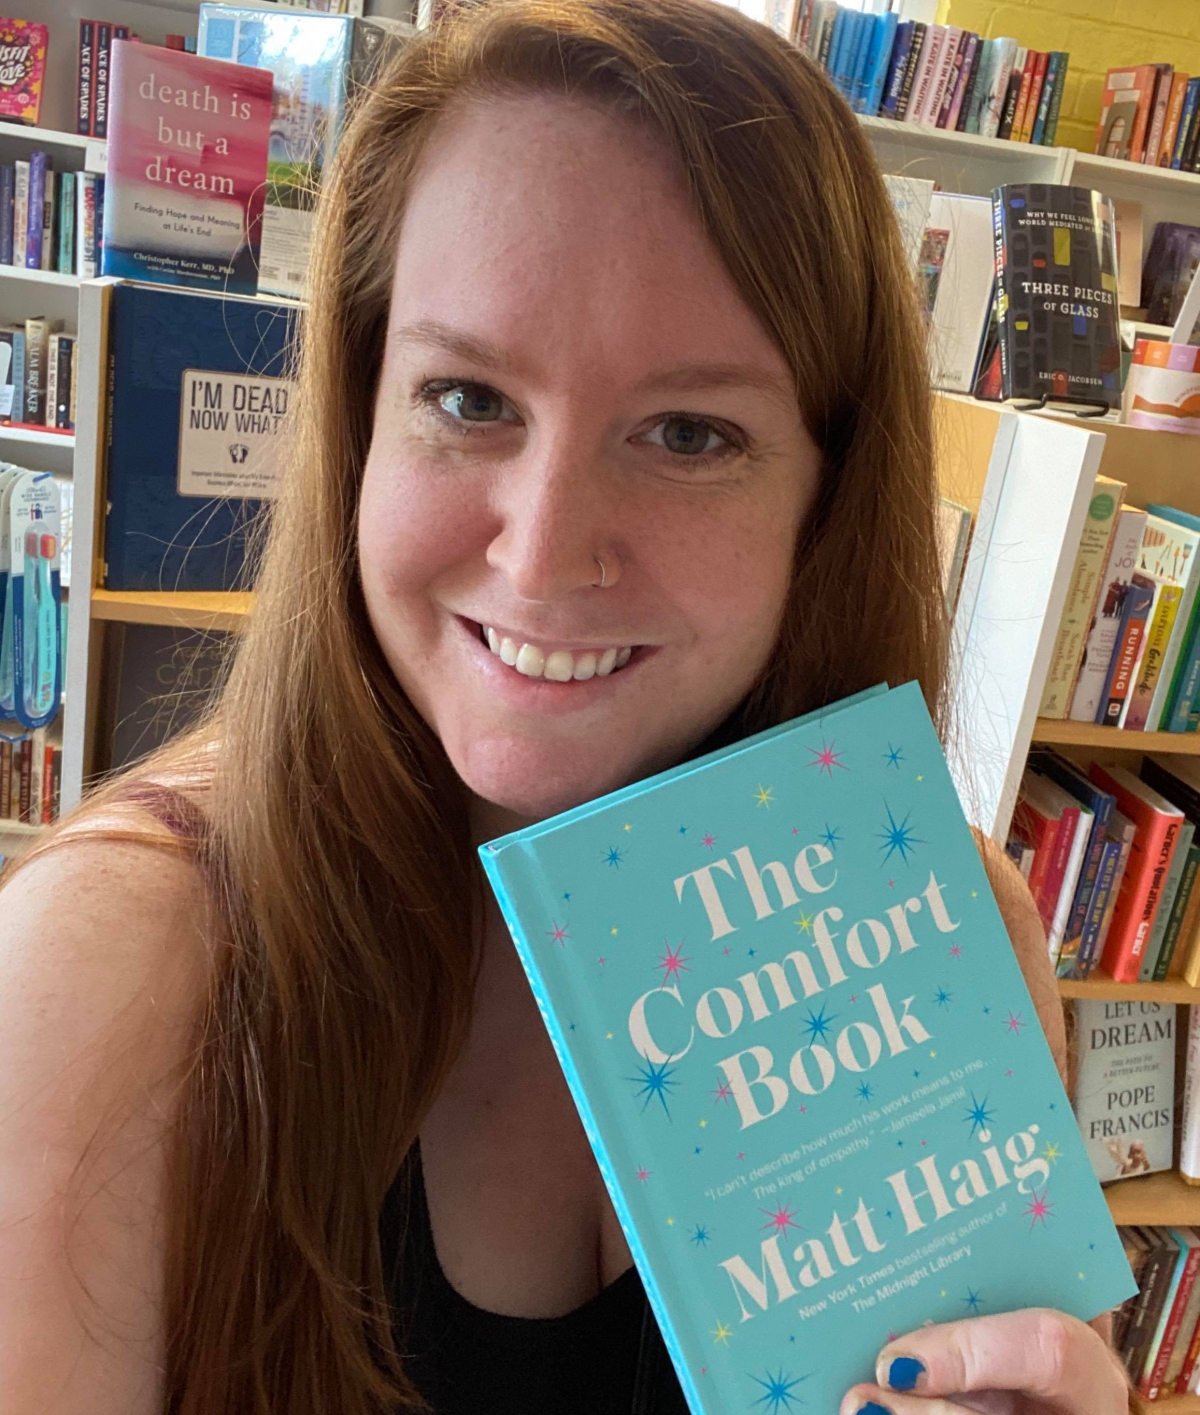 Matt Haig Gives Perspective in “The Comfort Book”